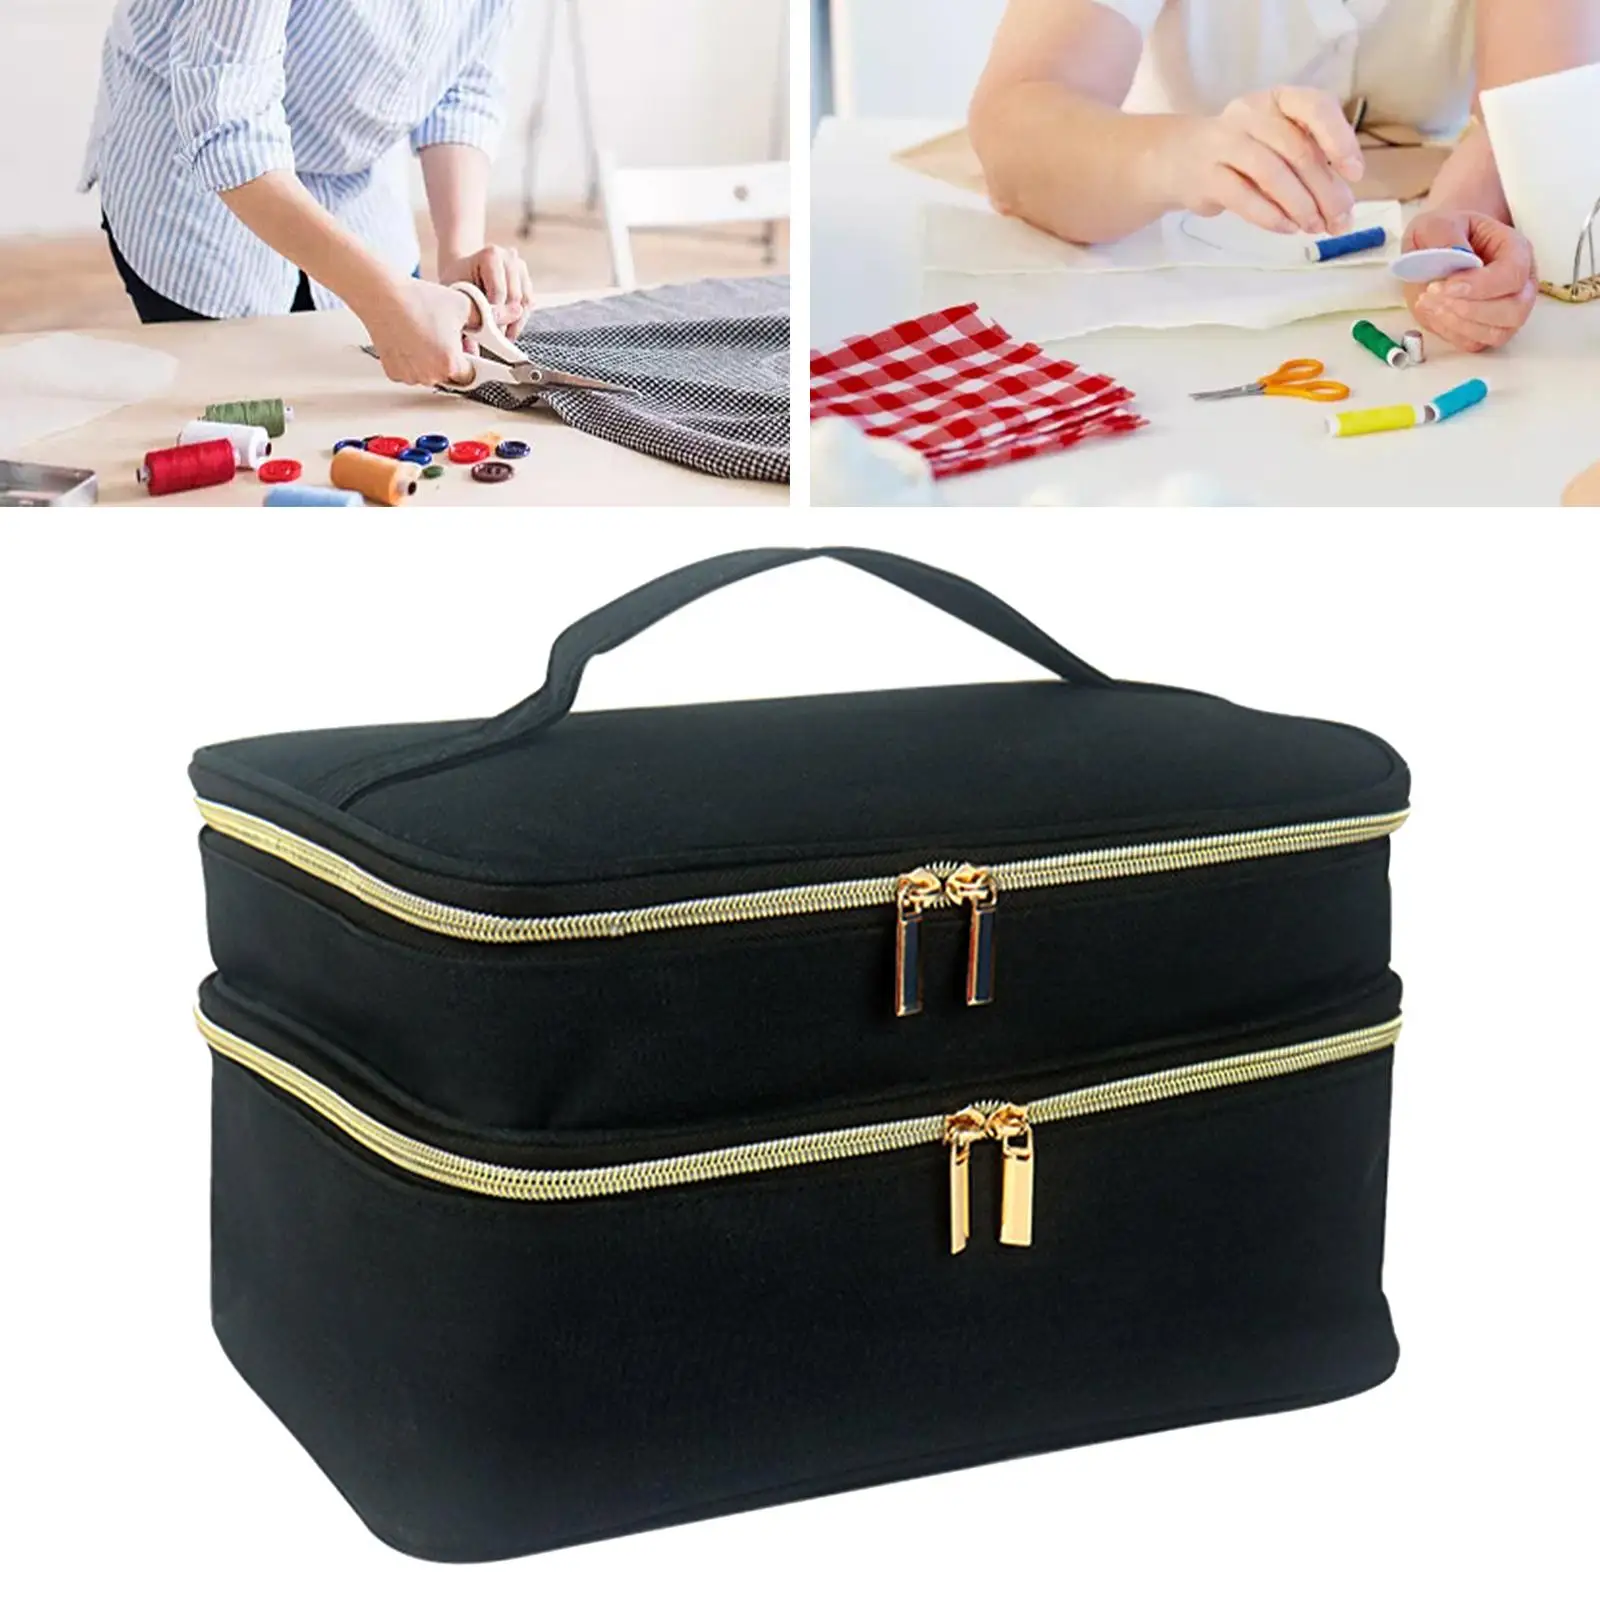 Sewing Storage Organizer Wear Resistant Multifunctional Durable for Beginner Home